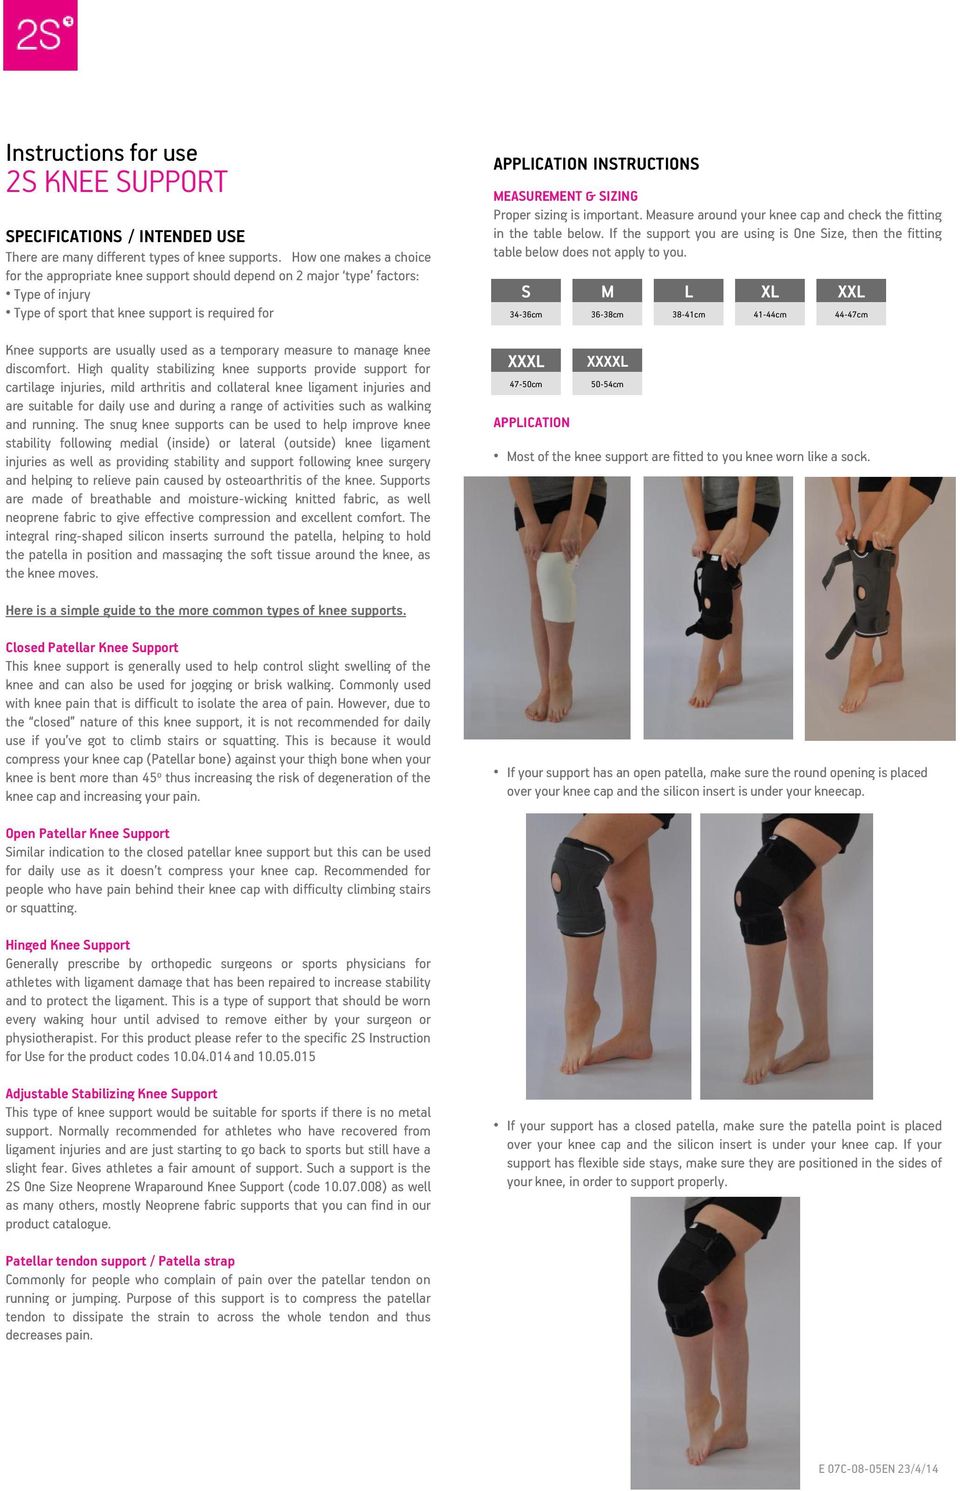 temporary measure to manage knee discomfort.